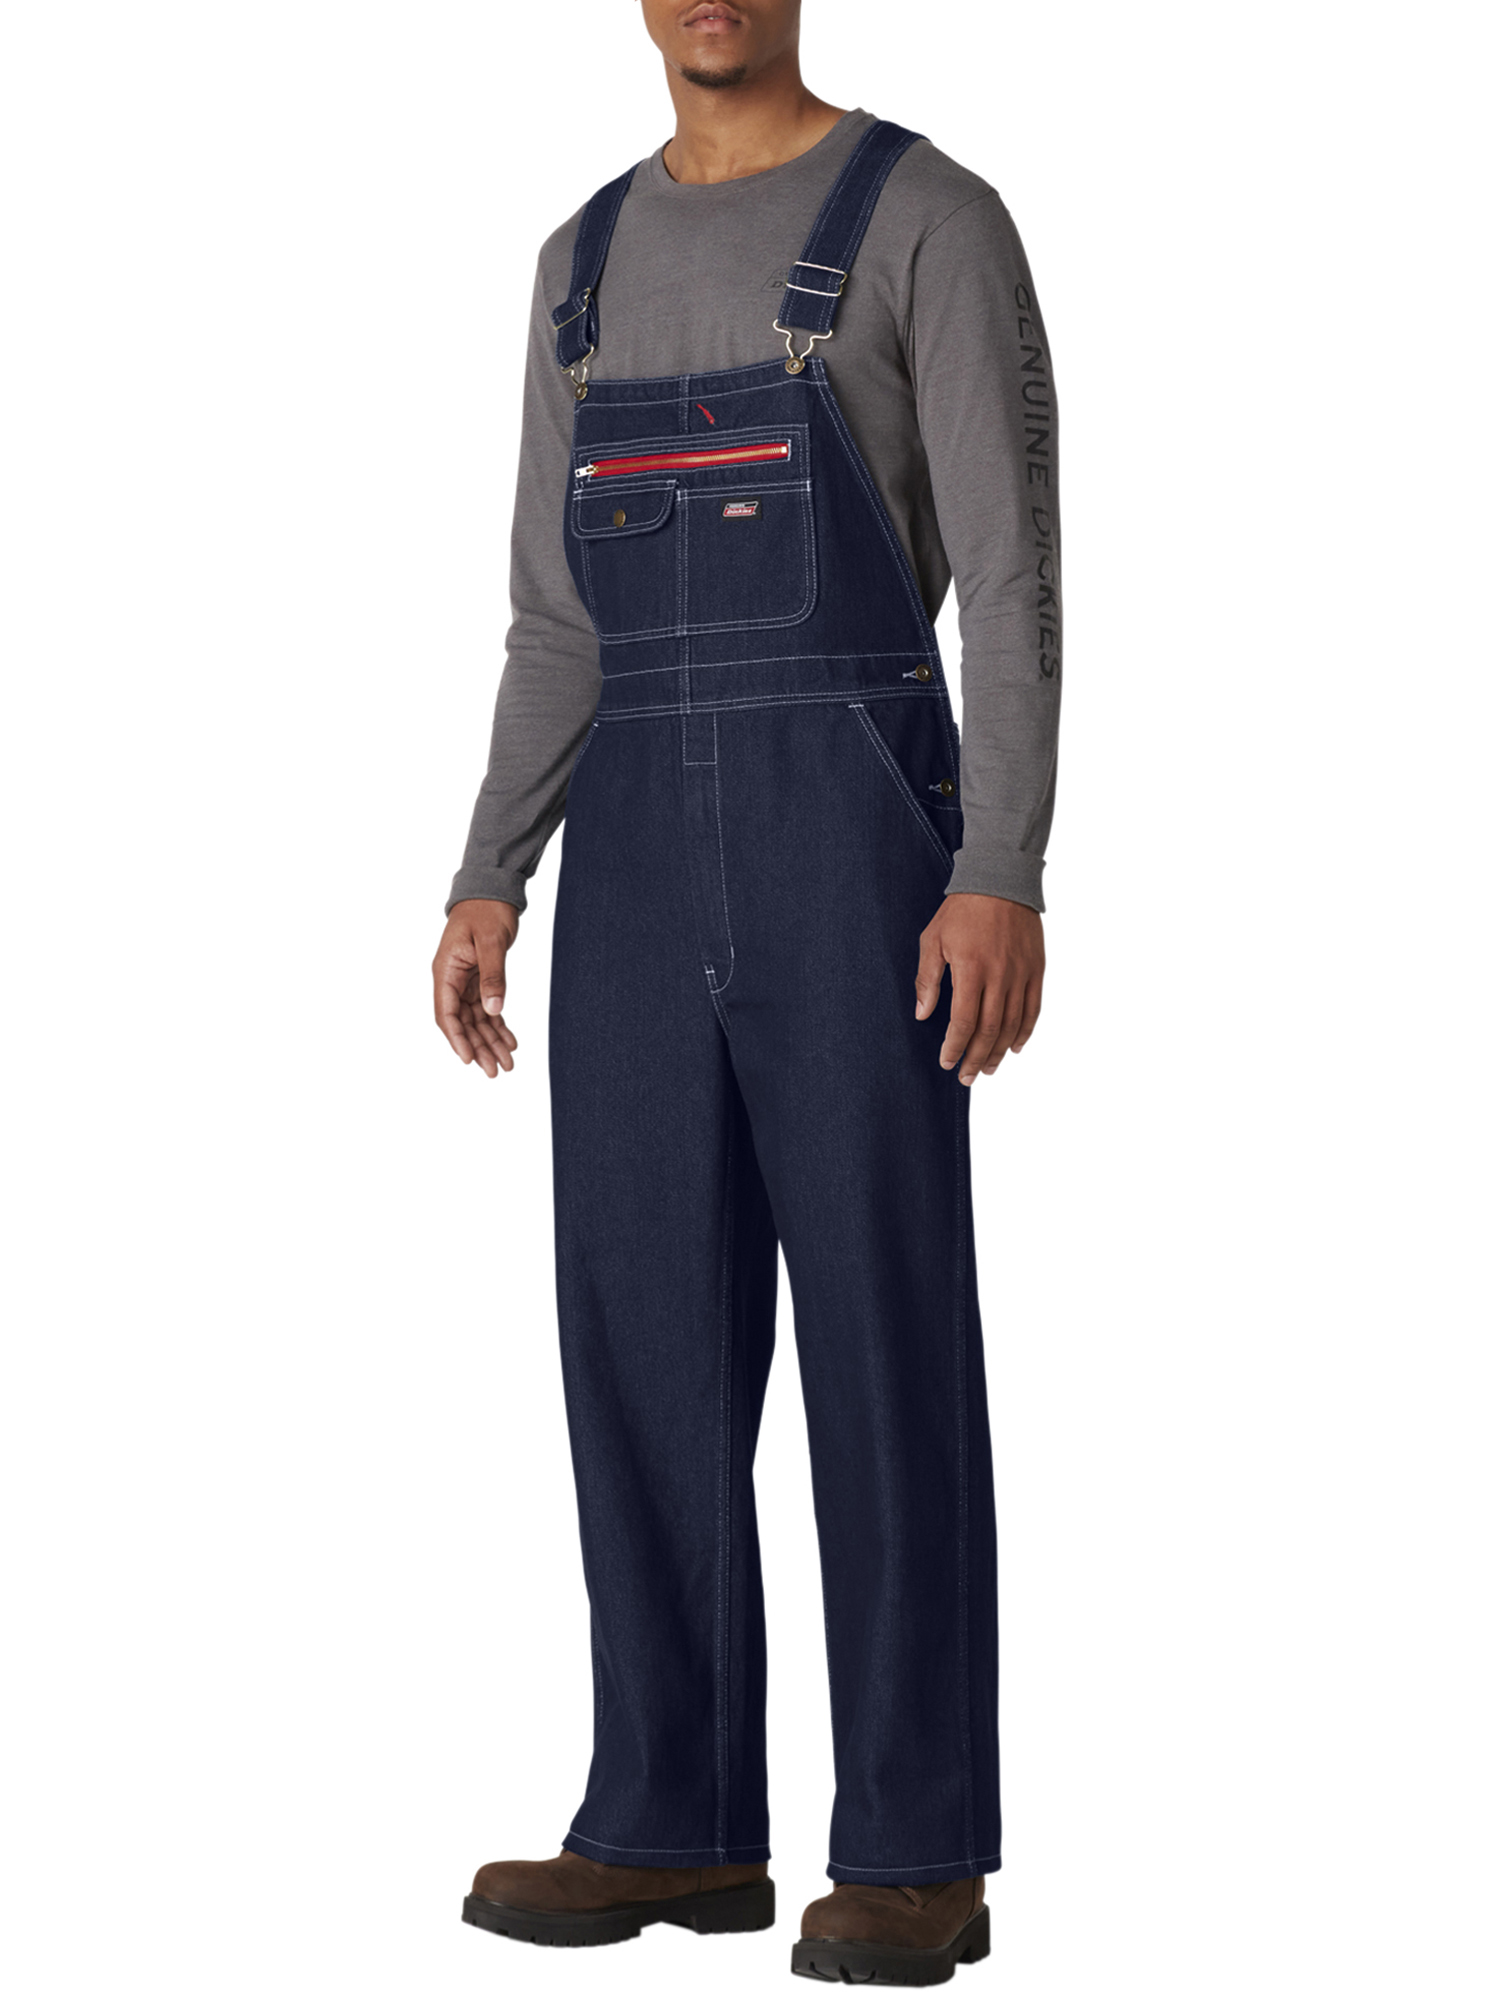 Genuine Dickies Men's Relaxed Fit Ultra Tough Workwear Bib Overall - image 1 of 6